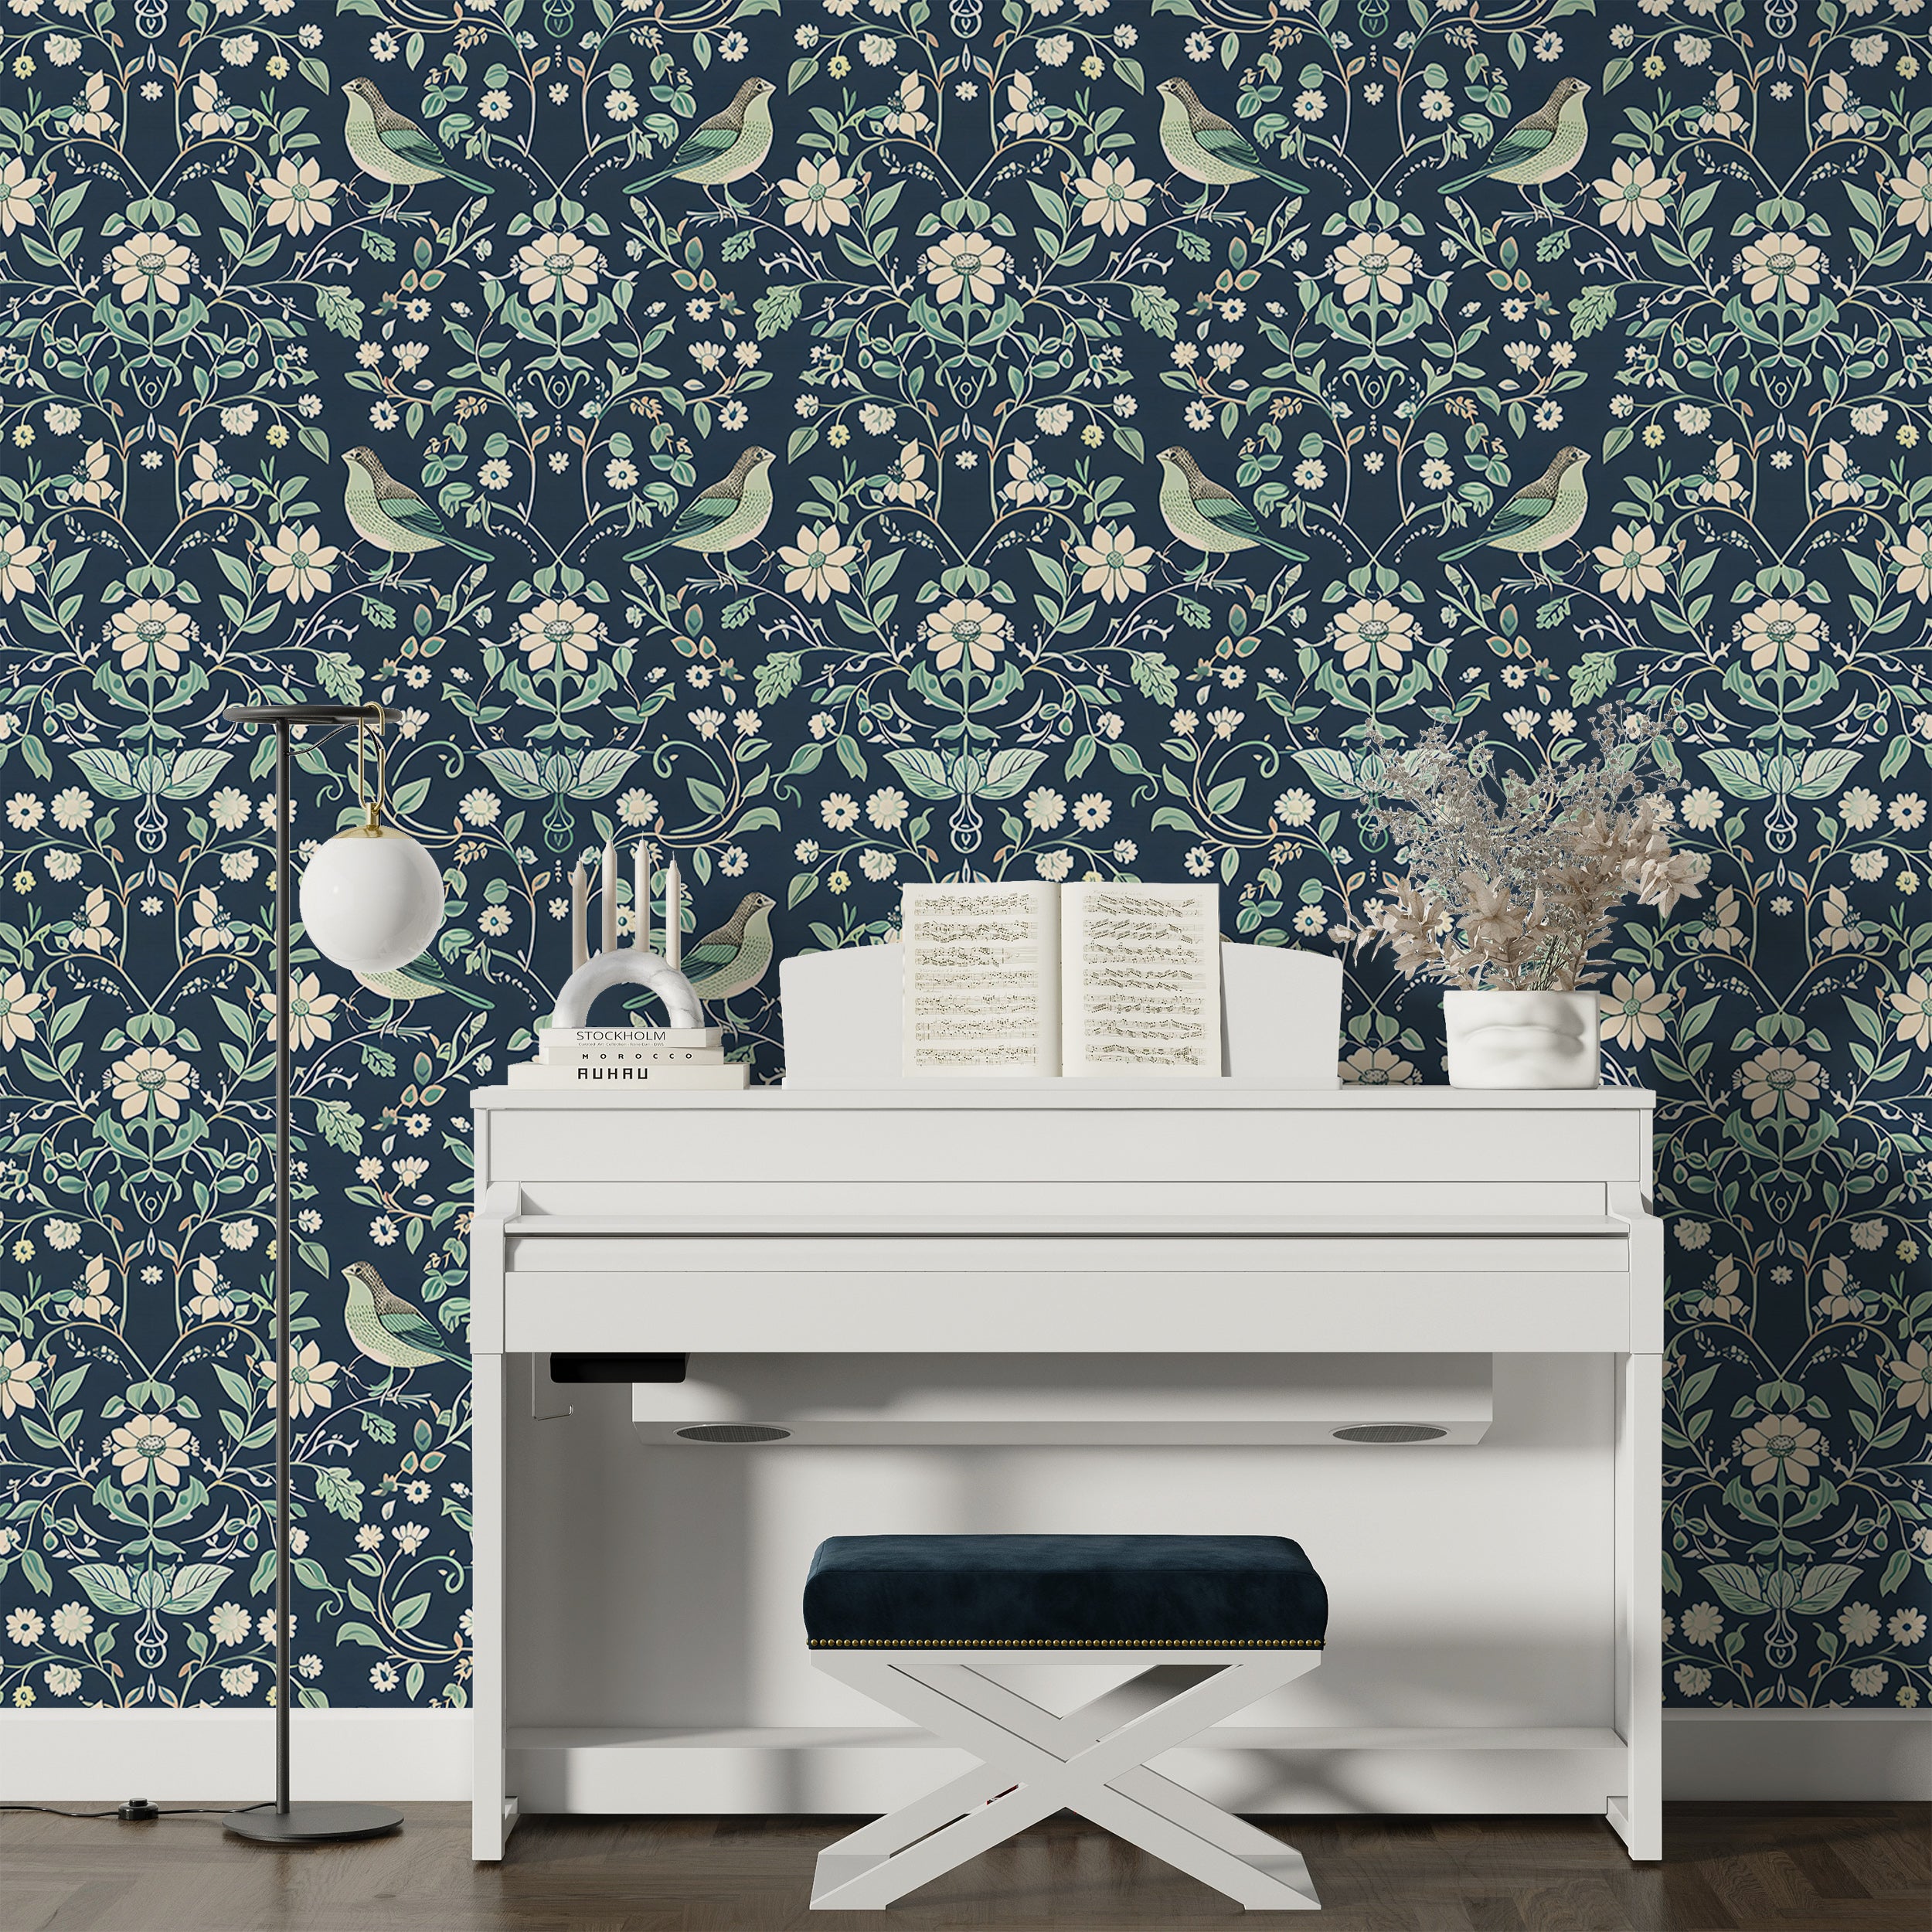 Mint and Navy Blue Chinoiserie Wallpaper, Peel and Stick Floral Wall Decal, Birds Flowers and Leaves Pattern Removable Wallpaper, Vintage Wall Art